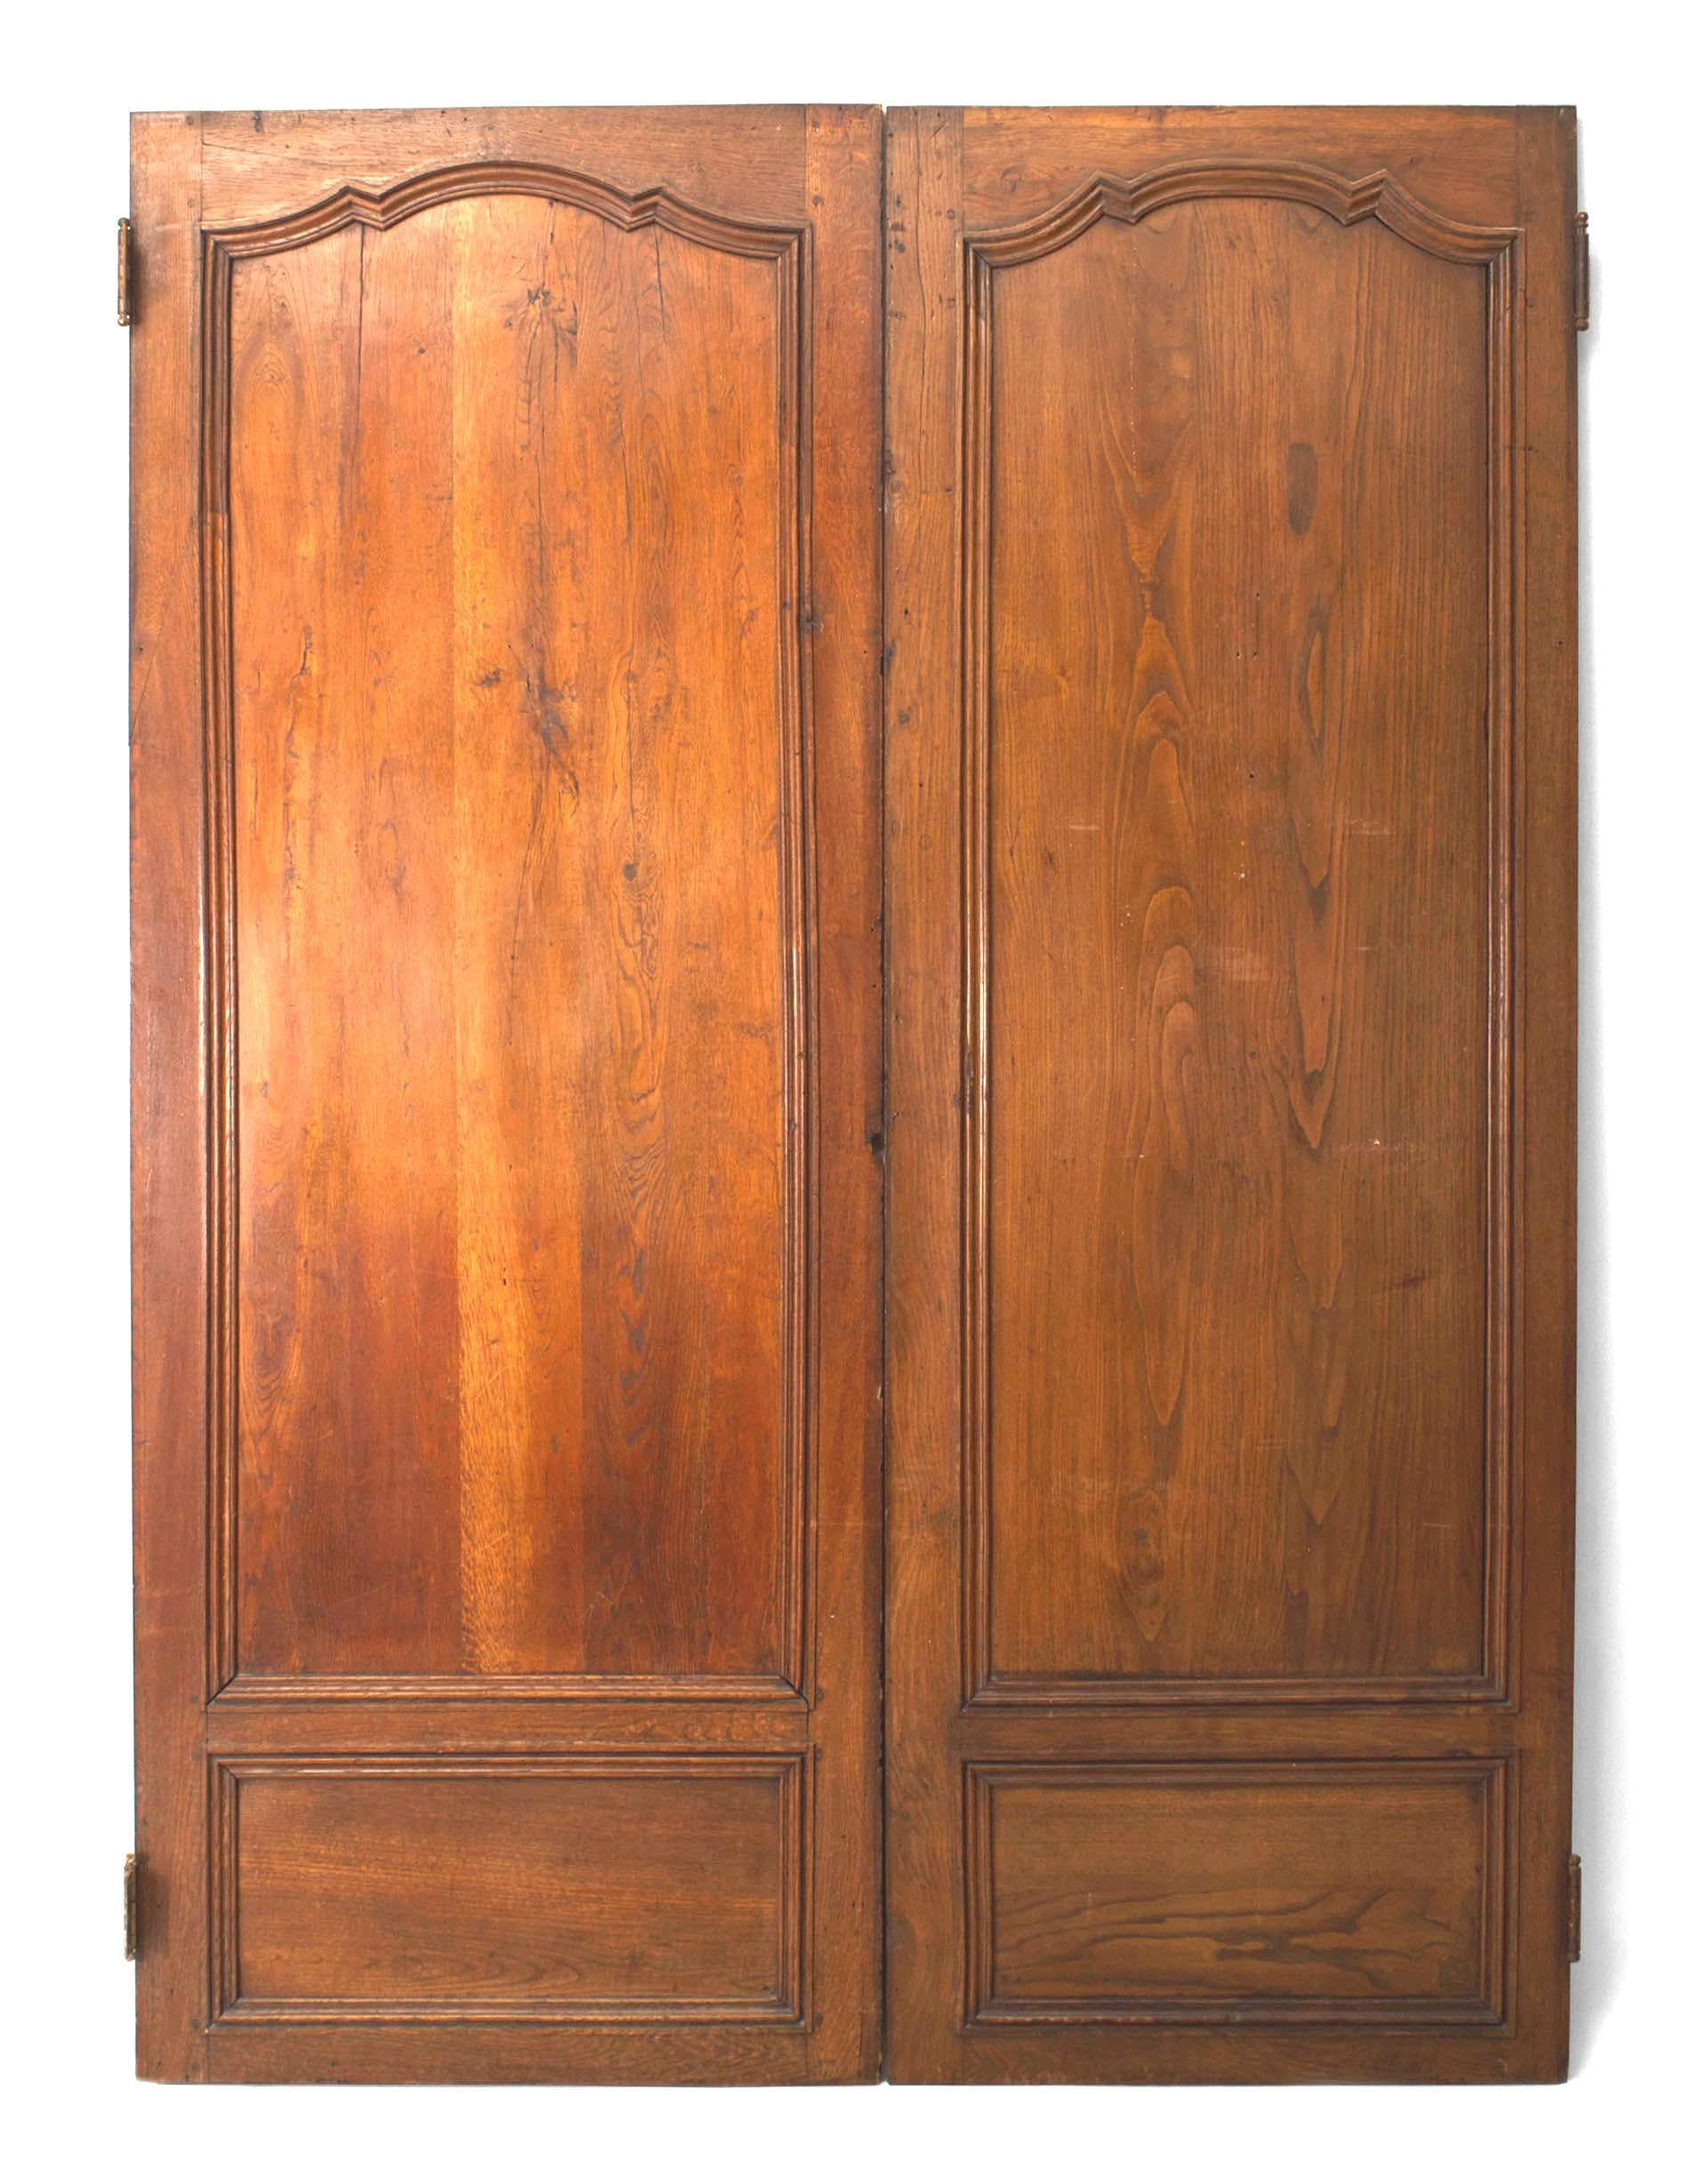 Pair of French Provincial (18th Century) similarly sized walnut door panels with a shaped top molding, unfinished on back. (PRICED AS Pair).
